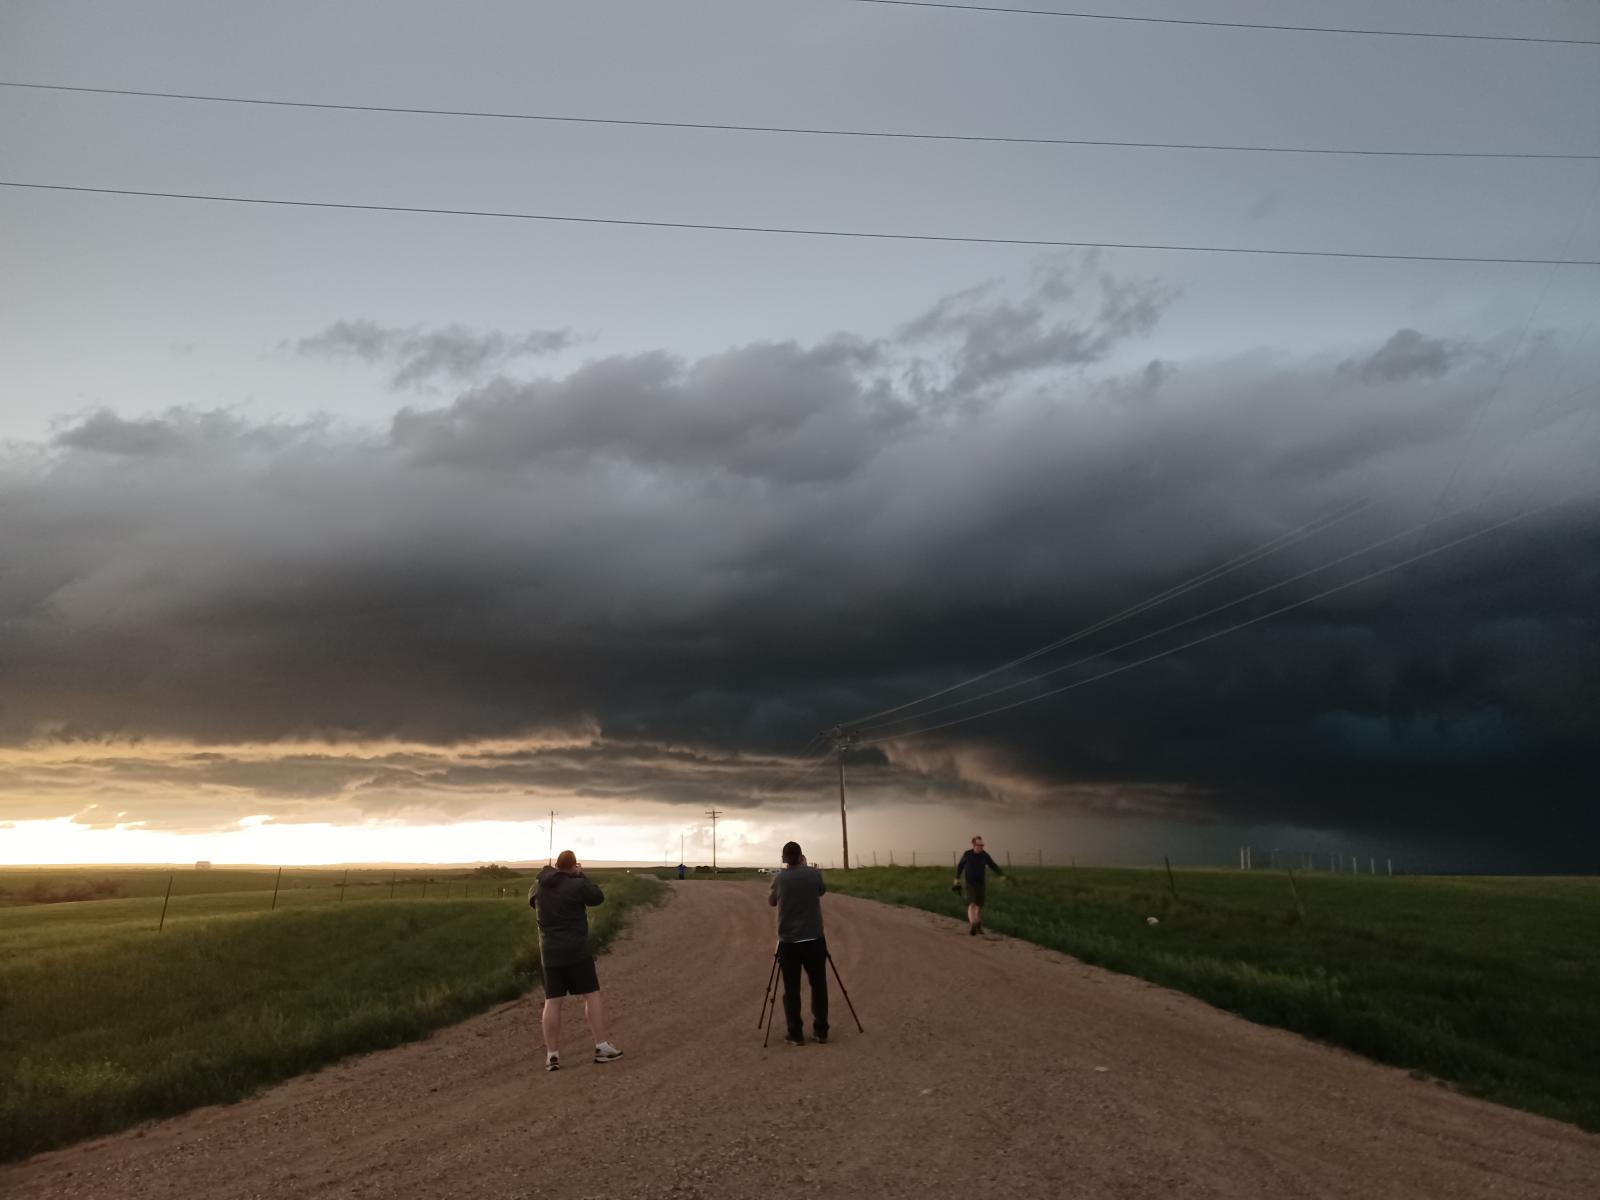 Grabbing photos of the storm as dusk approached